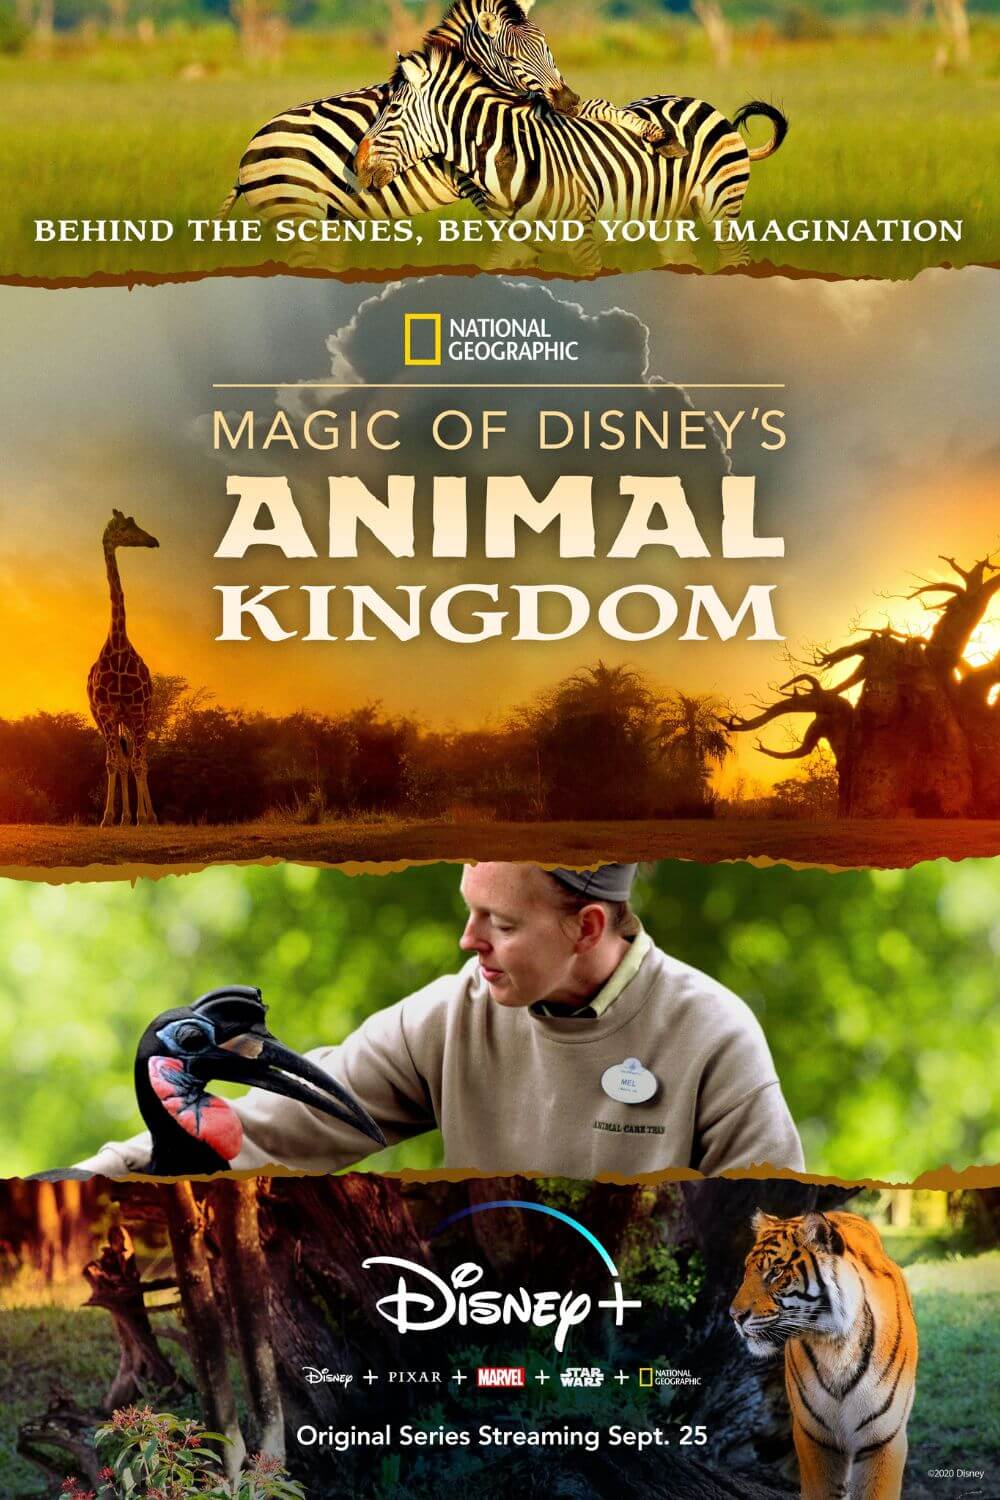 Promotional poster for the Disney+ and National Geographic show, Magic of DIsney's Animal Kingdom. Text at the top of the poster reads "Behind the scenes, beyond your imagination."